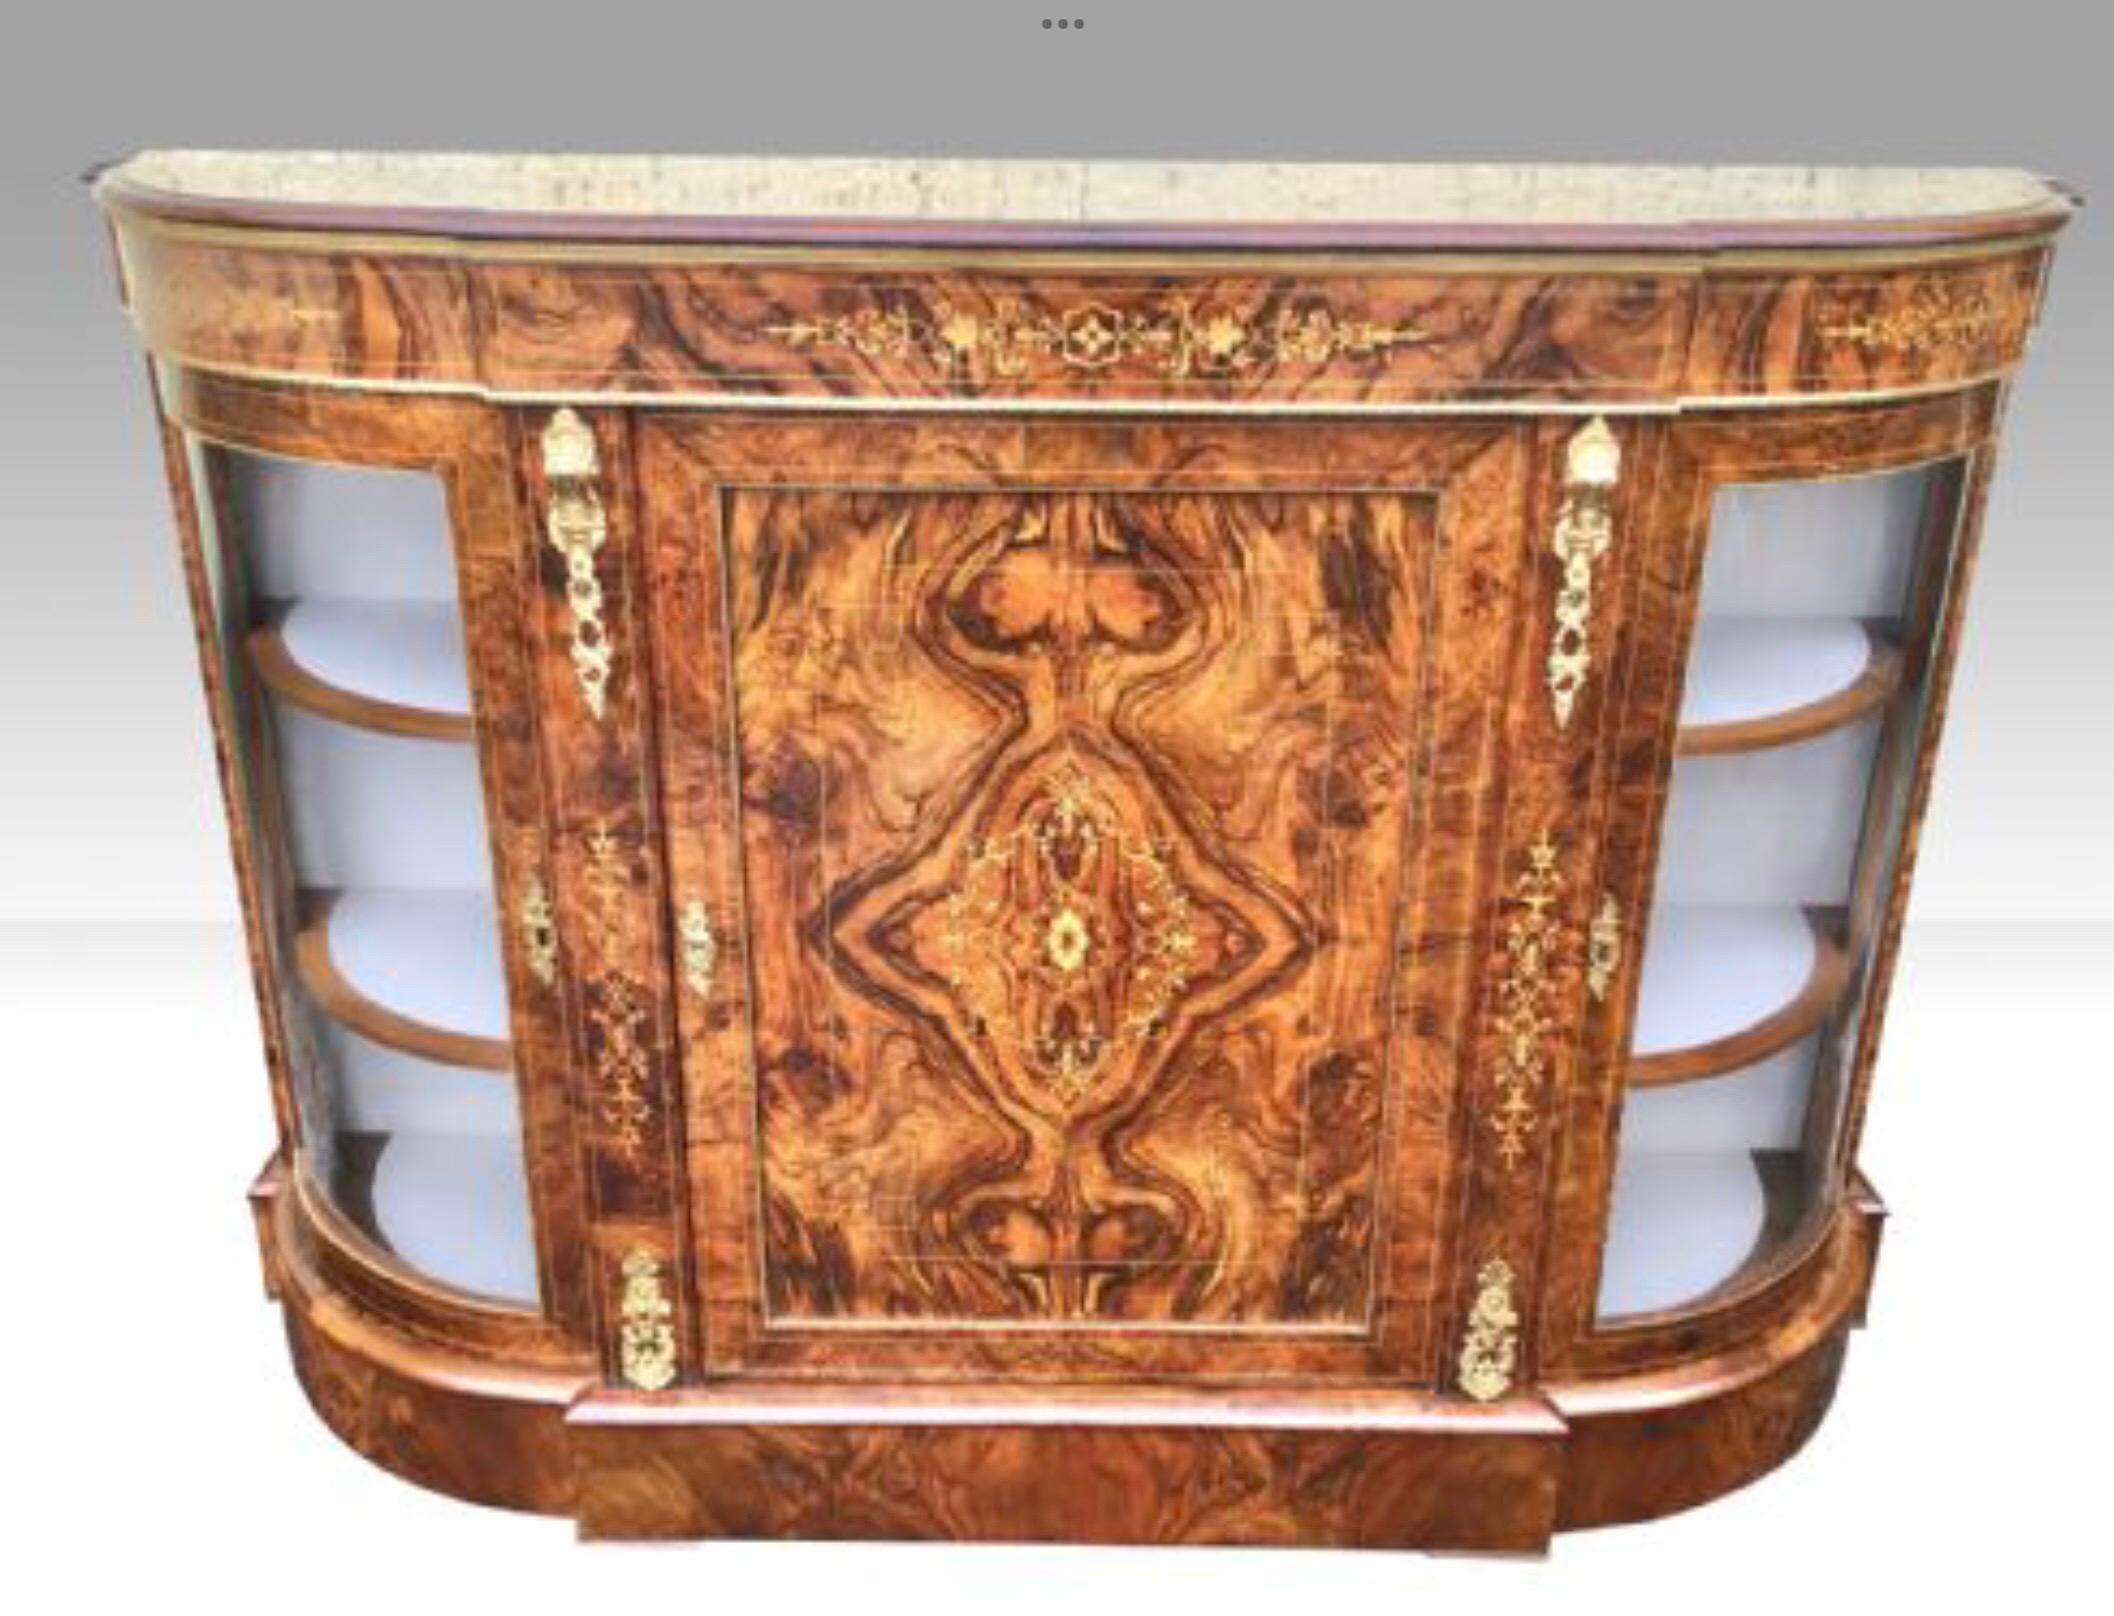 A stunning exhibition quality Victorian figured and burr walnut and gilt ormolu mounted antique credenza cabinet sideboard with central hinged door flanked by glazed bowed shape glazed ends all opening to reveal shelved storage and display area